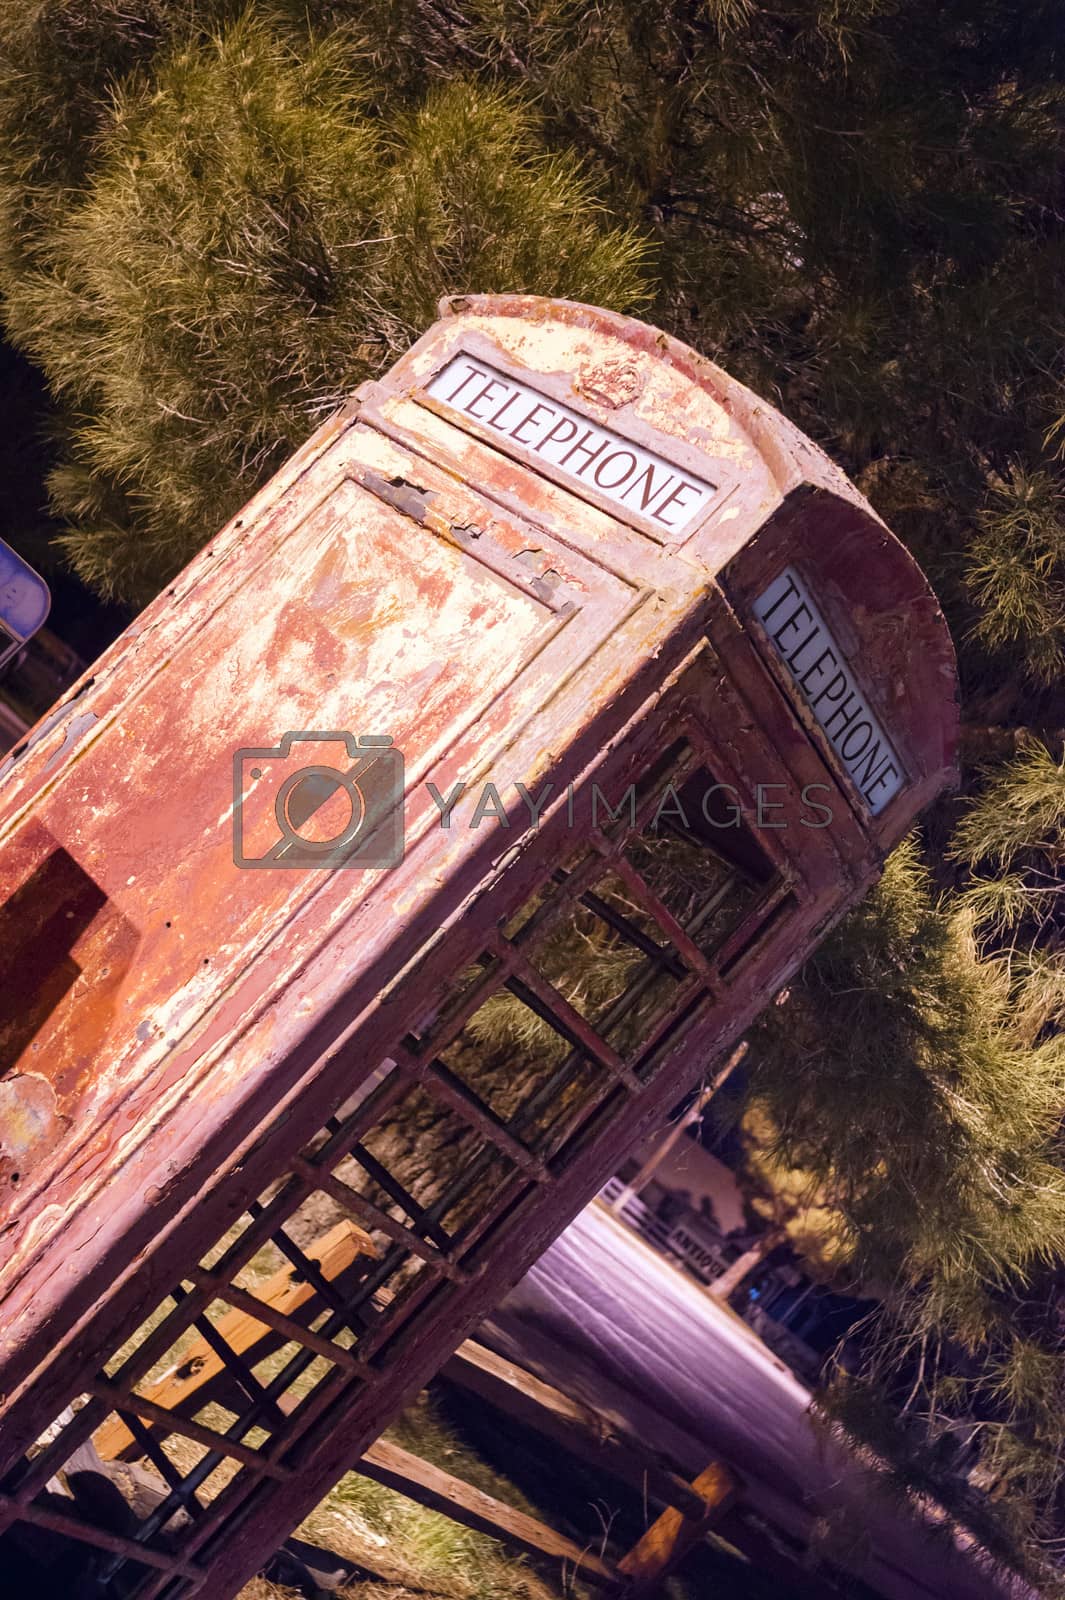 Royalty free image of Skewed Vintage Obsolete Outdoor Telephone Booth Southwest Rural  by ChrisBoswell